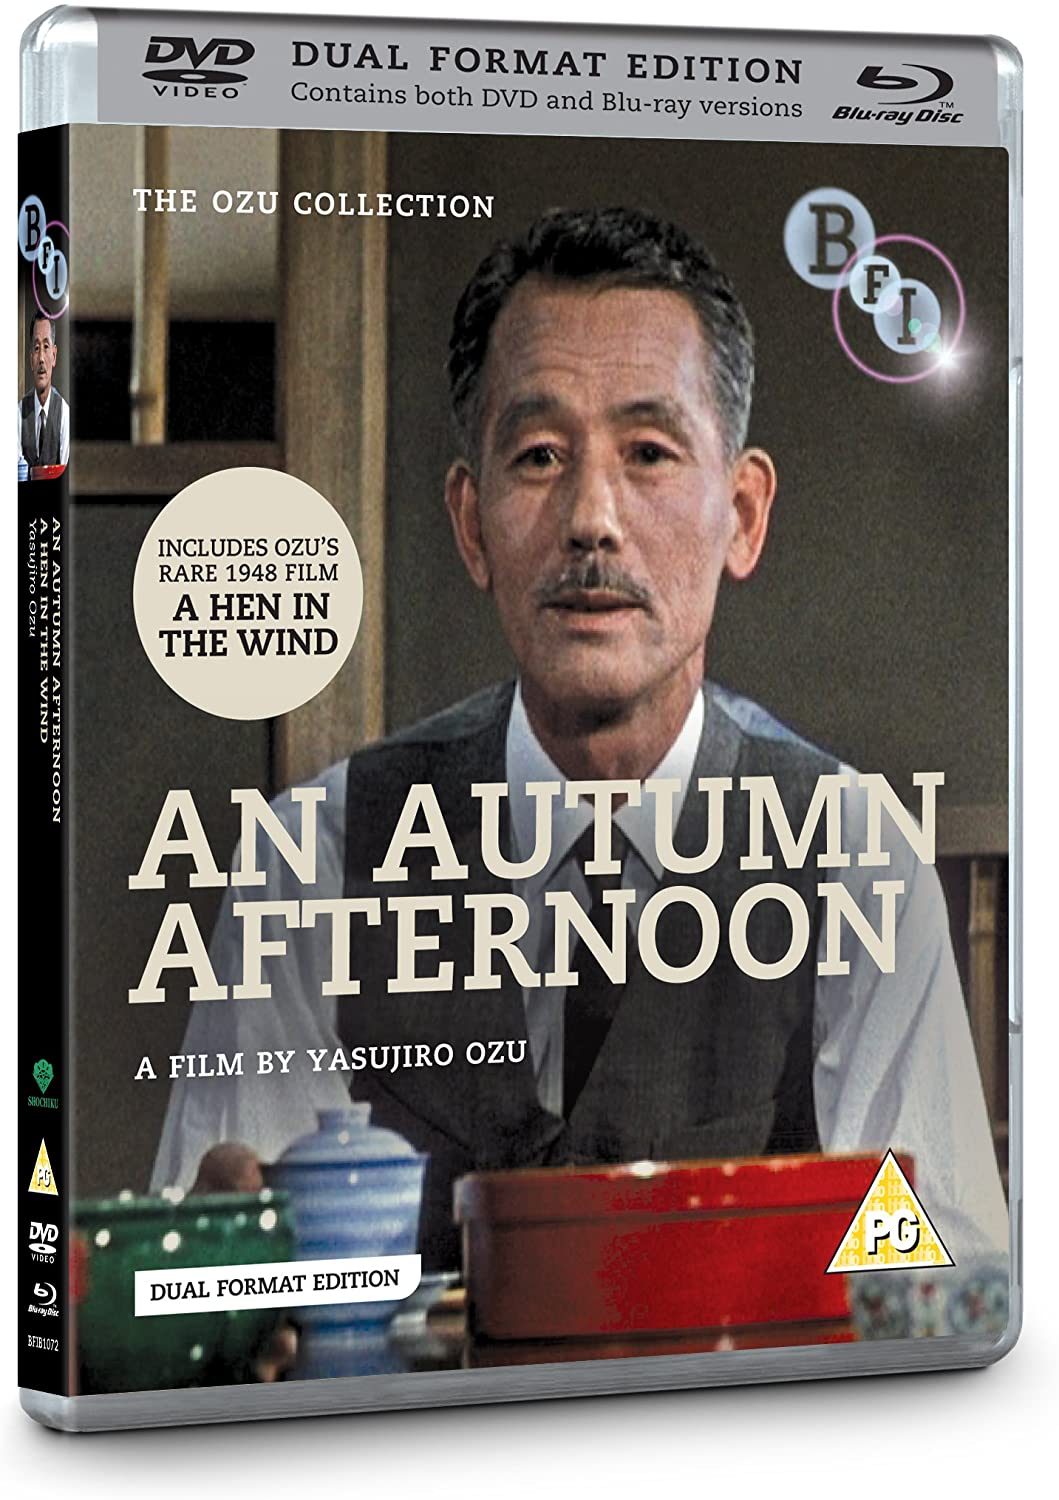 An Autumn Afternoon / A Hen in the Wind [1962] - [DVD]